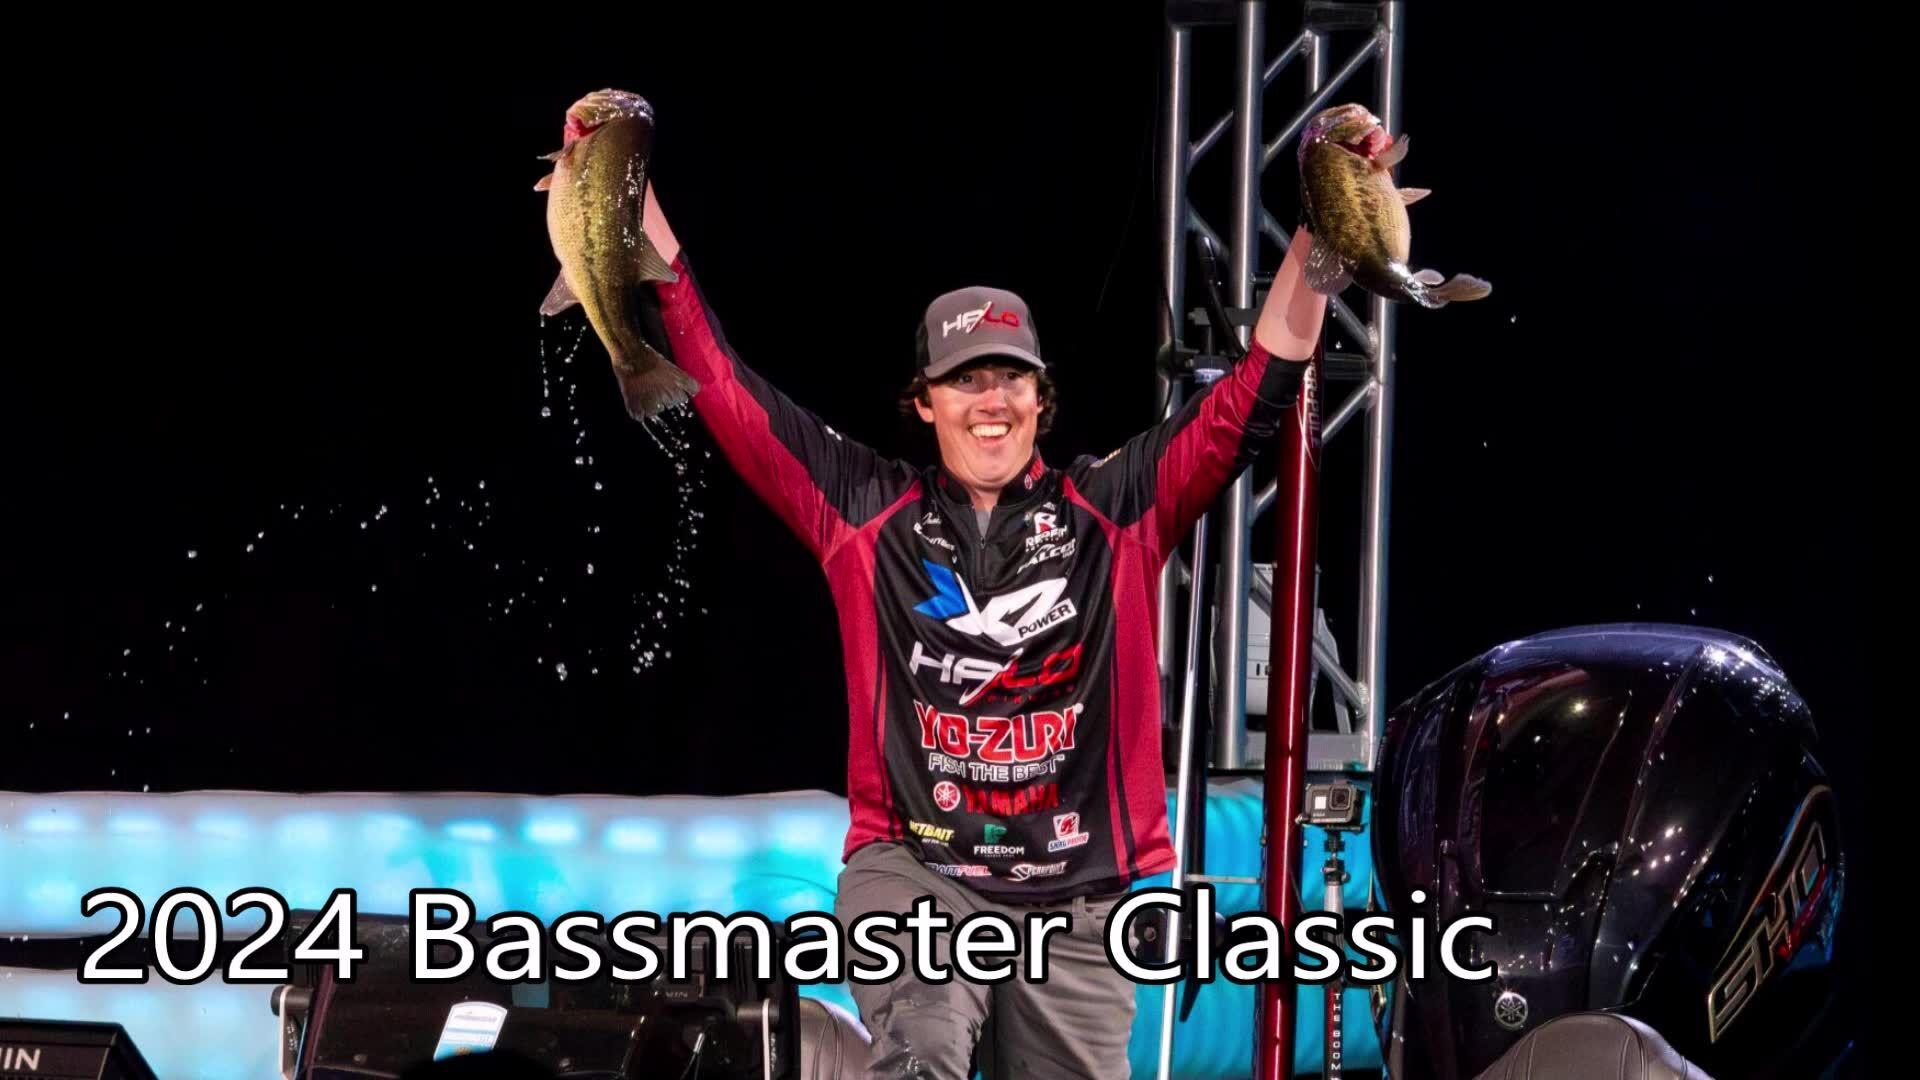 2024 Bassmaster Classic hosted by Tulsa's BOK Center and Grand Lake